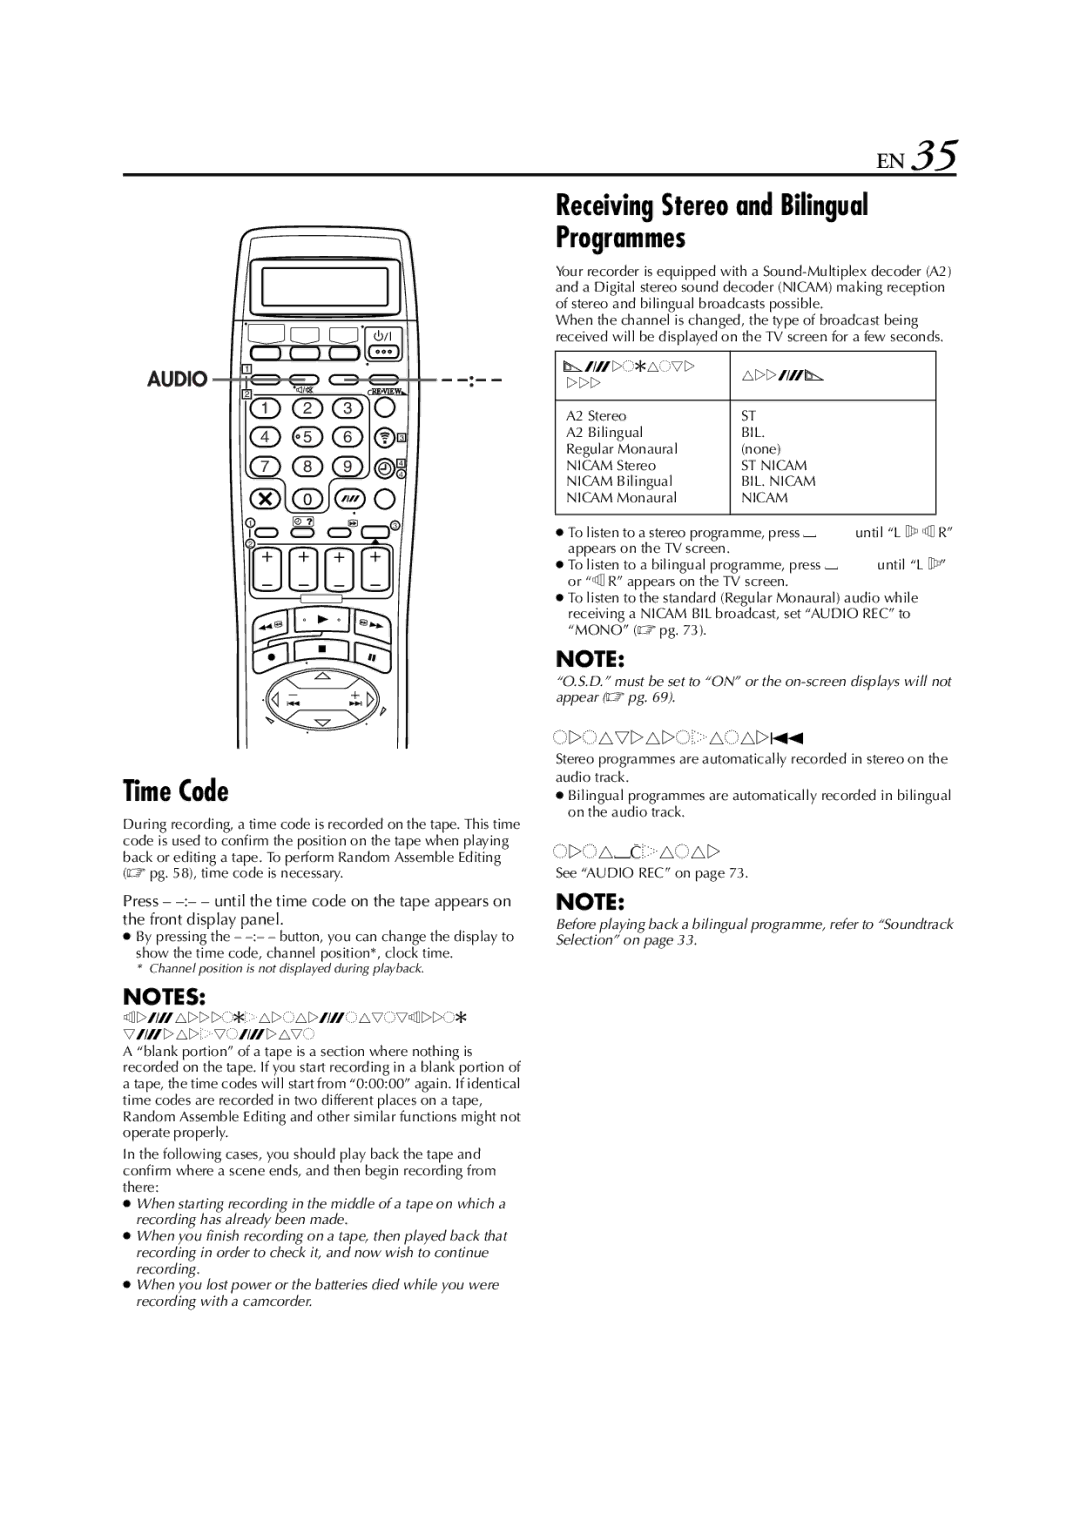 JVC LPT0640-001A specifications Time Code, See Audio REC on 